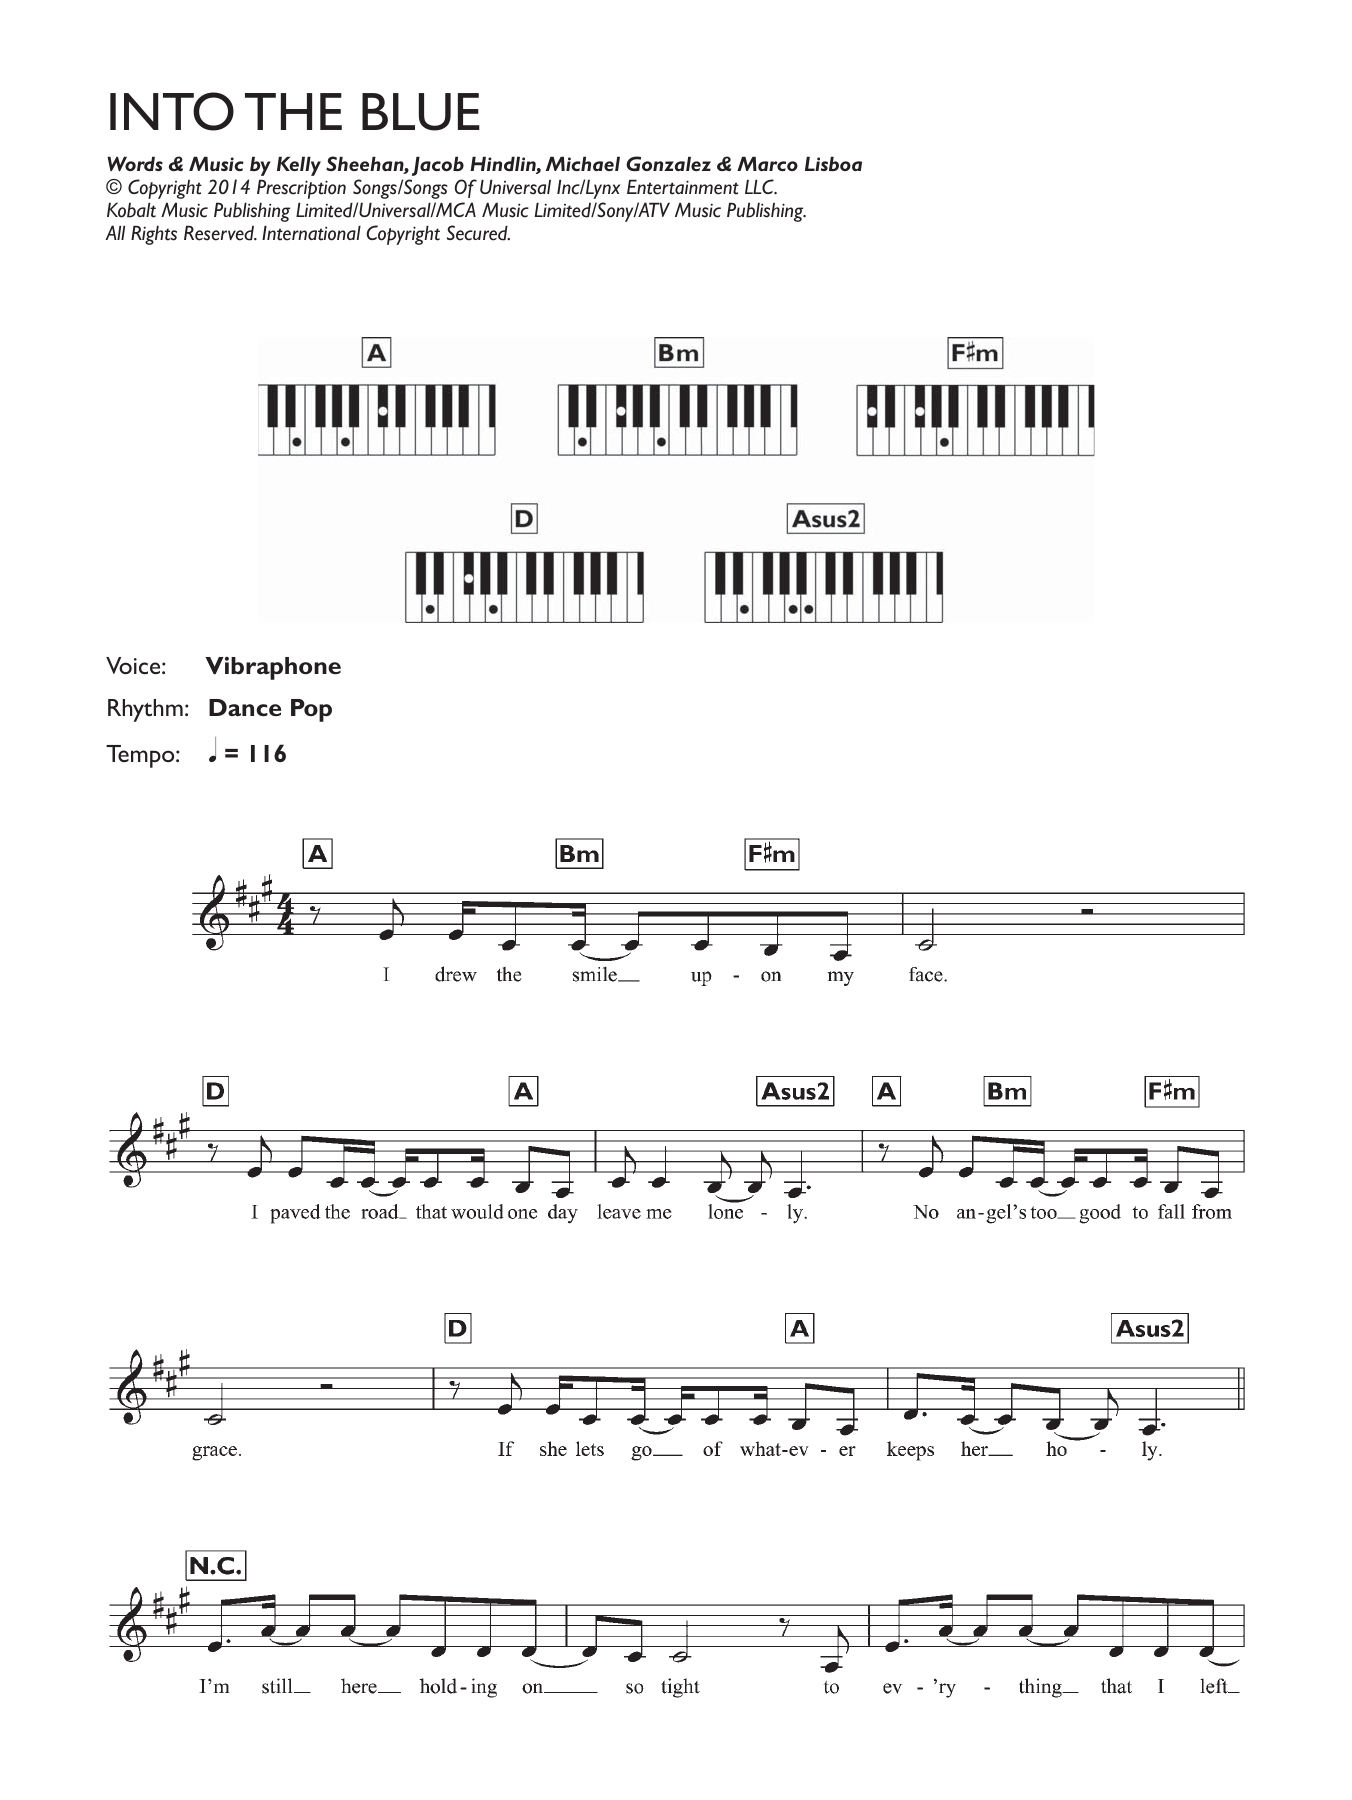 Download Kylie Minogue Into The Blue Sheet Music